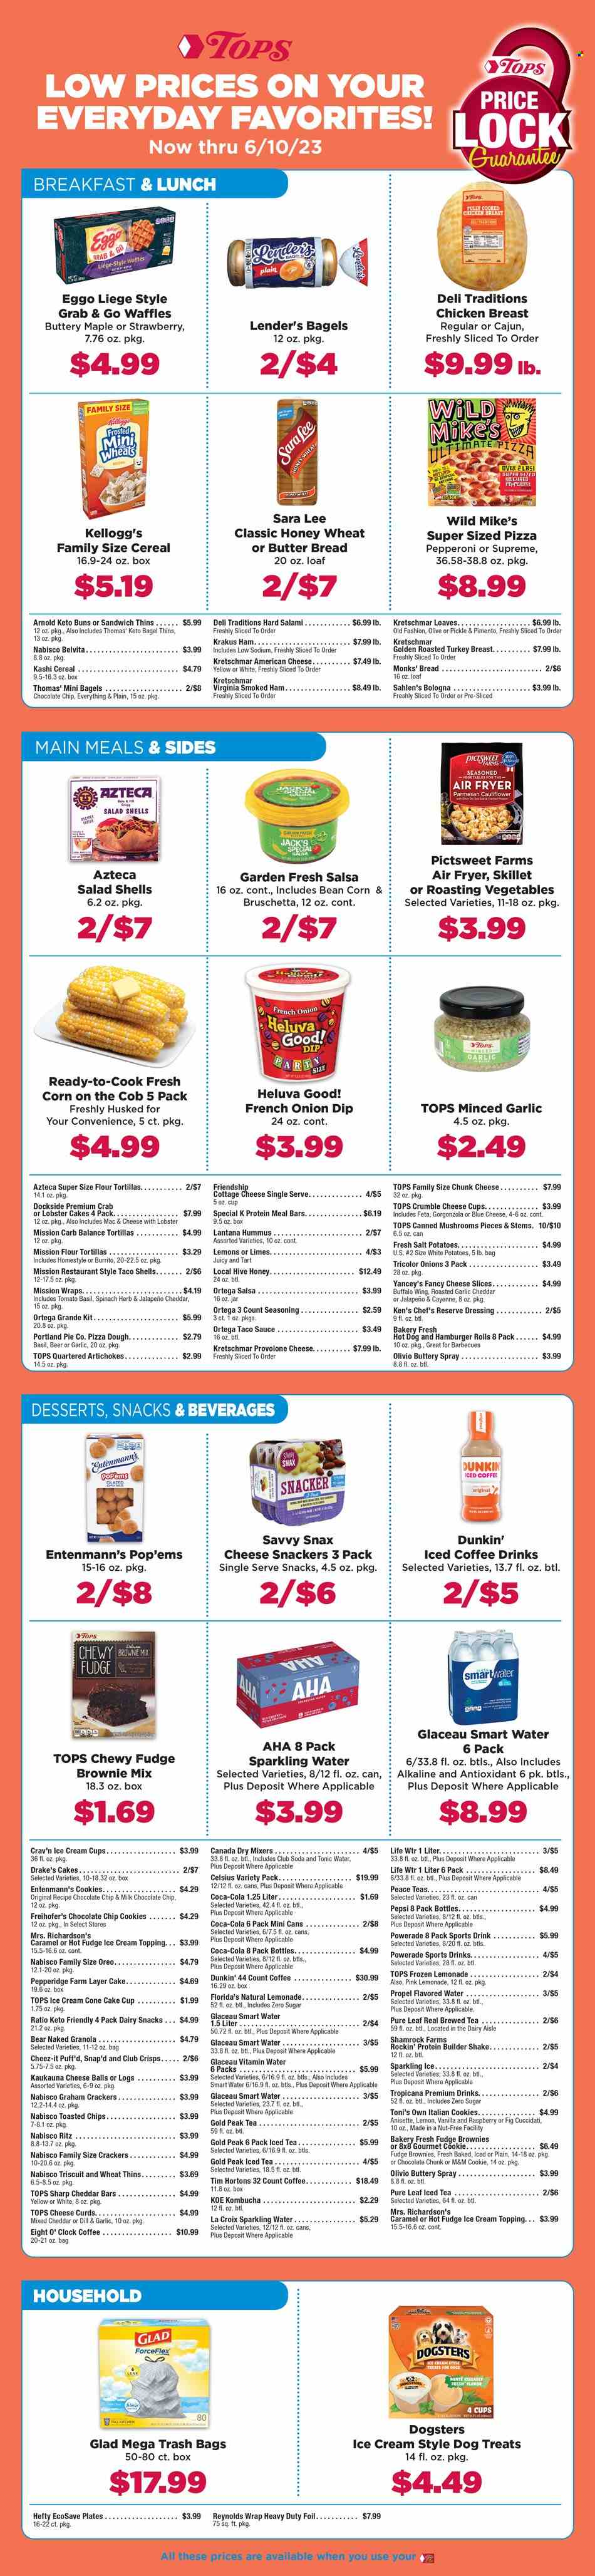 thumbnail - Tops Flyer - 04/30/2023 - 06/10/2023 - Sales products - mushrooms, bagels, bread, tortillas, buns, burger buns, Sara Lee, flour tortillas, wraps, waffles, Entenmann's, Drake's Cakes, brownie mix, artichoke, corn, potatoes, limes, lobster, crab, lobster cakes, hot dog, hamburger, sauce, burrito, bruschetta, salami, ham, smoked ham, bologna sausage, hummus, american cheese, cottage cheese, sliced cheese, cheese cup, parmesan, gorgonzola, feta, cheese curd, chunk cheese, Provolone, Oreo, amasi, shake, pizza dough, ice cream, cheese balls, cookies, graham crackers, milk chocolate, chocolate chips, snack, M&M's, crackers, Kellogg's, Florida's Natural, RITZ, Nabisco, Thins, Cheez-It, topping, canned mushrooms, cereals, granola, belVita, dill, spice, taco sauce, dressing, salsa, olive oil, Canada Dry, Coca-Cola, Powerade, Pepsi, energy drink, ice tea, tonic, soft drink, Gold Peak Tea, Club Soda, flavored water, sparkling water, Smartwater, vitamin water, iced coffee, kombucha, Pure Leaf, alcohol, Anisette, beer, chicken breasts, chicken, lemons. Page 1.